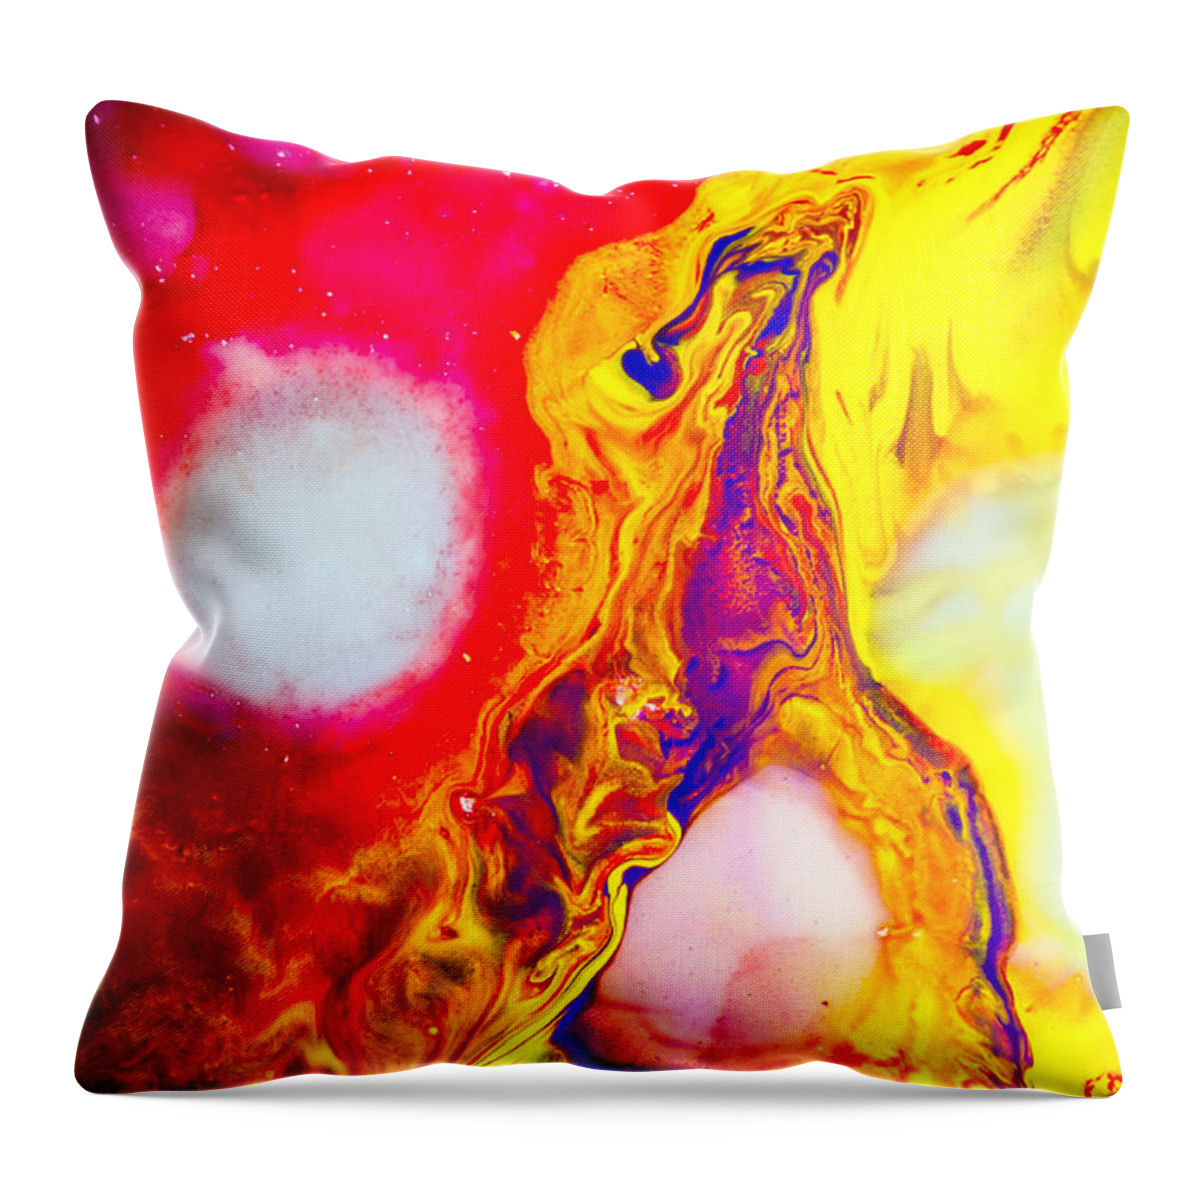 Giraffe Throw Pillow featuring the painting Giraffe in flames - Abstract Colorful Mixed Media Painting by Modern Abstract